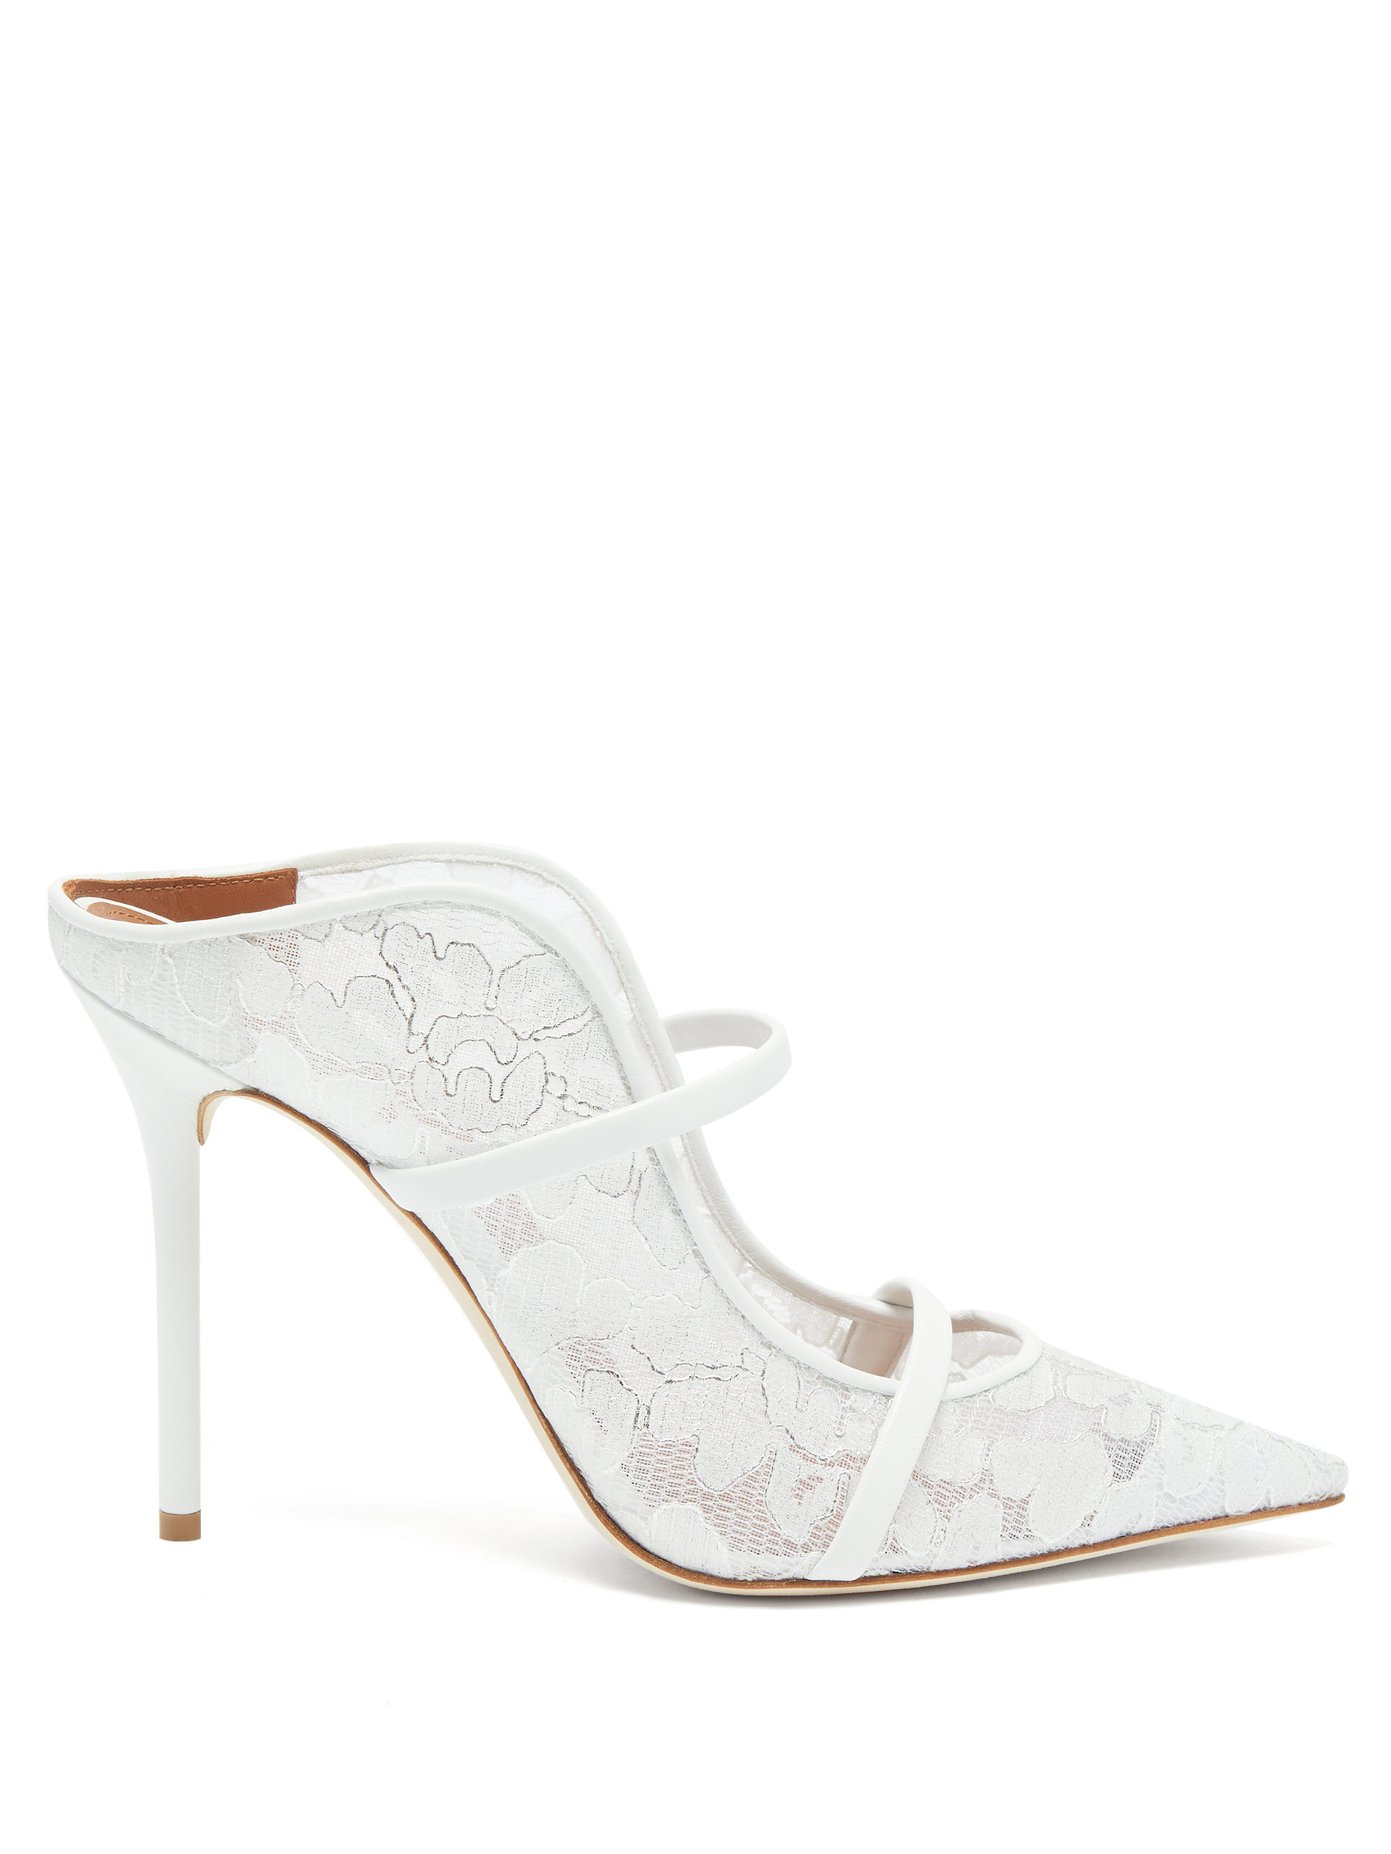 malone souliers white mules